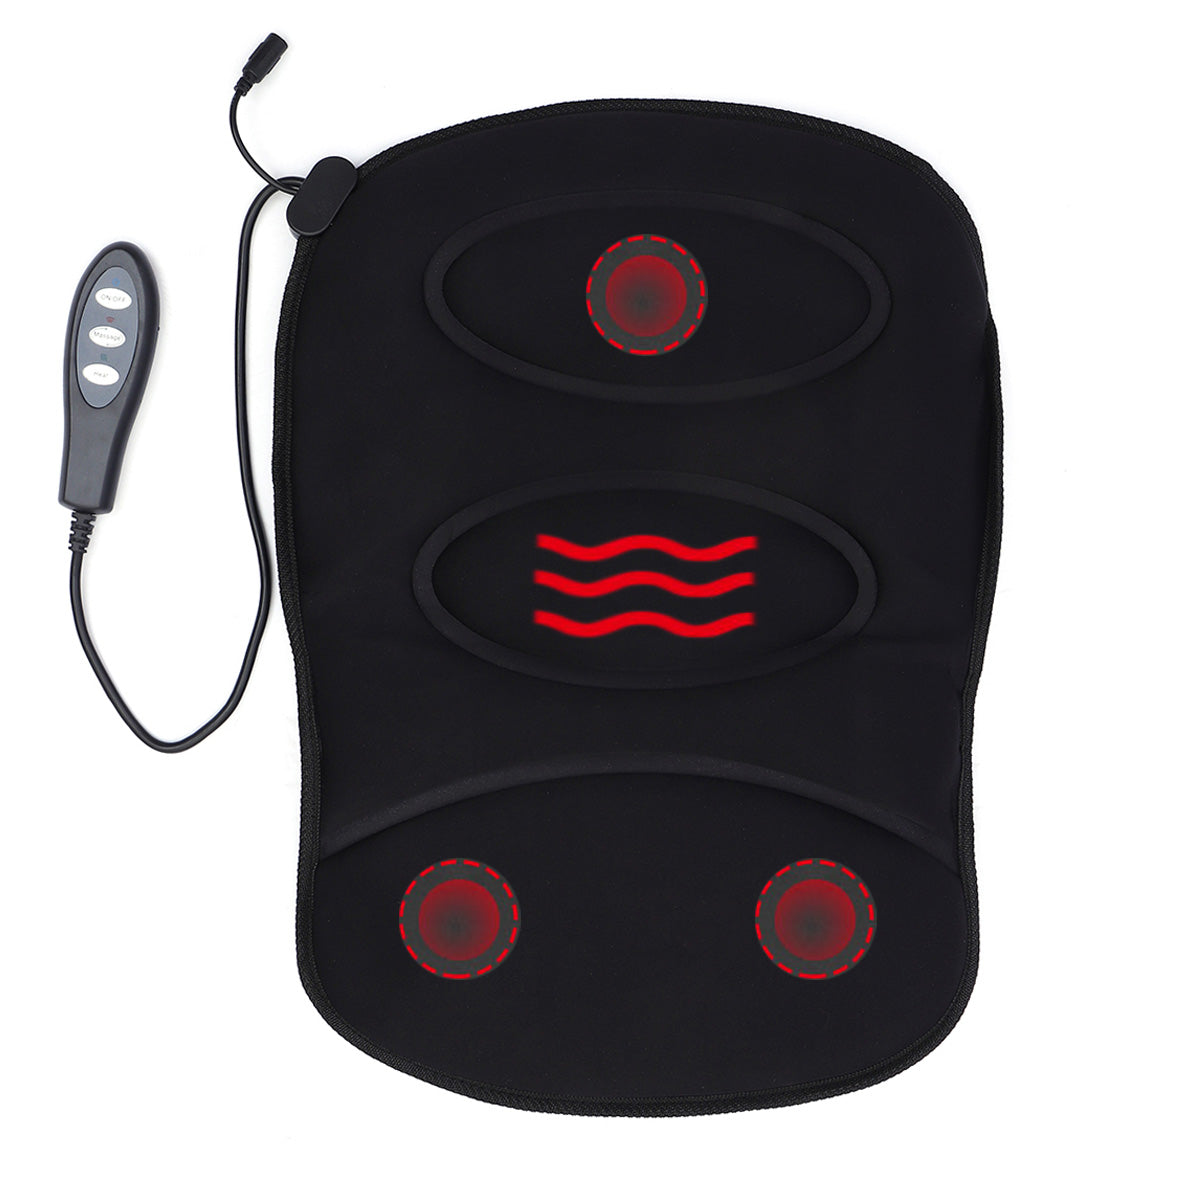 Protable Car Massage Cushion Ultra Thin Heating Function 3 Modes Car Home Office - Auto GoShop